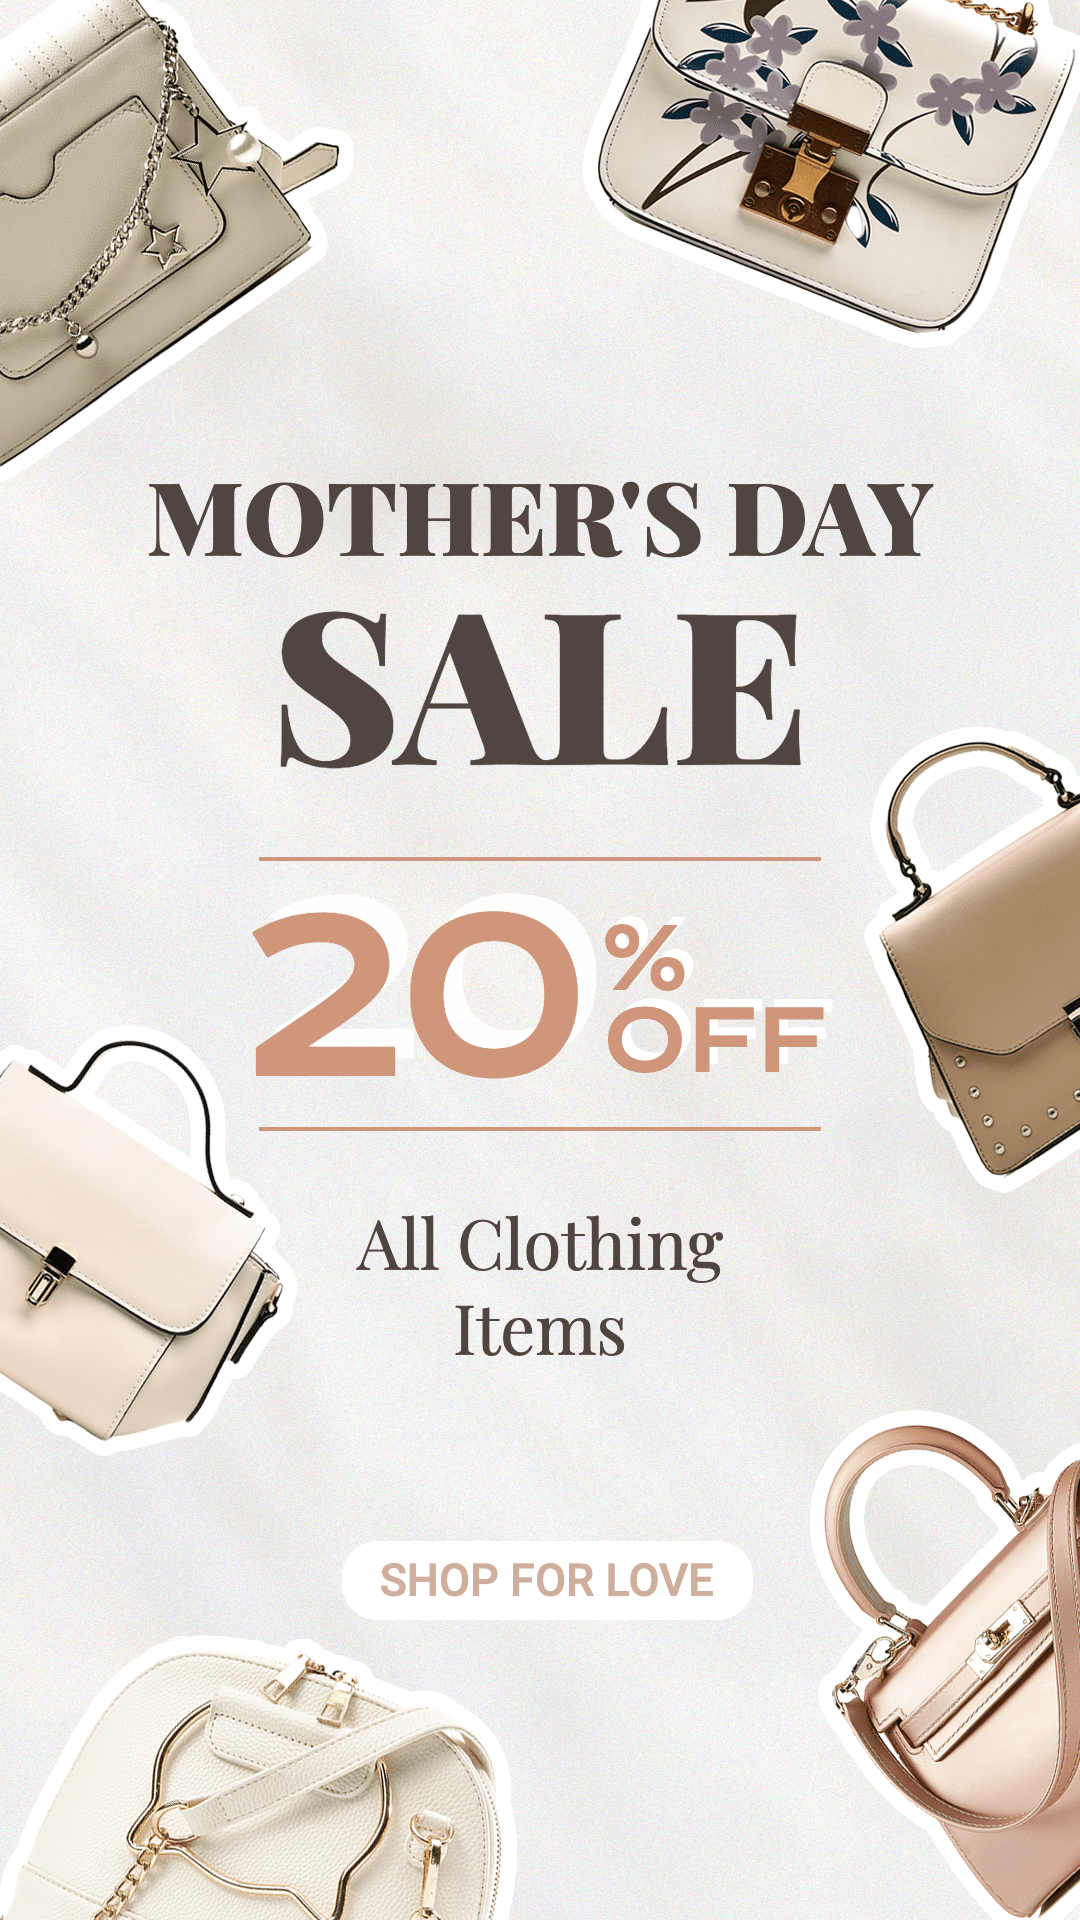 Mother's Day Women's Fahion Sale Promotion Ecommerce Story预览效果